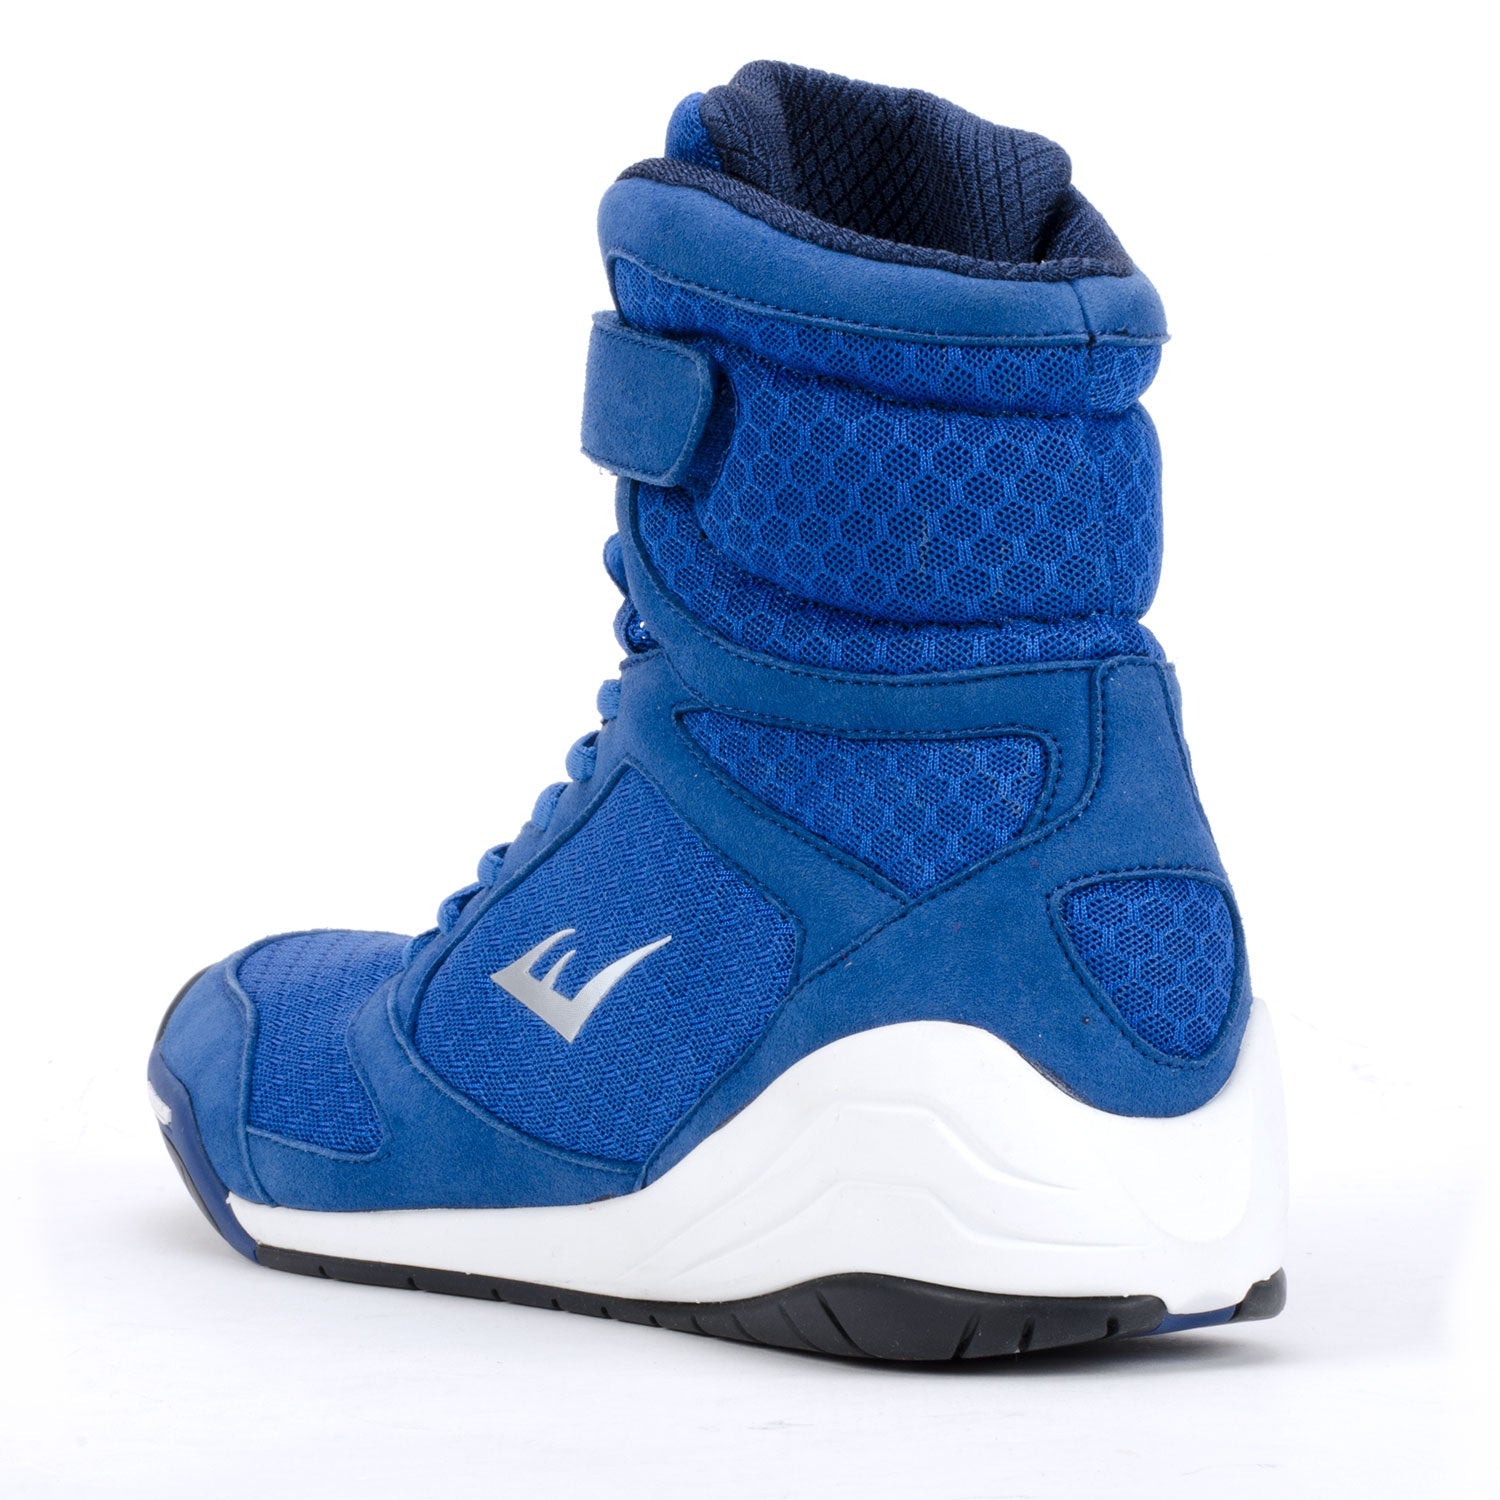 everlast high top boxing shoes